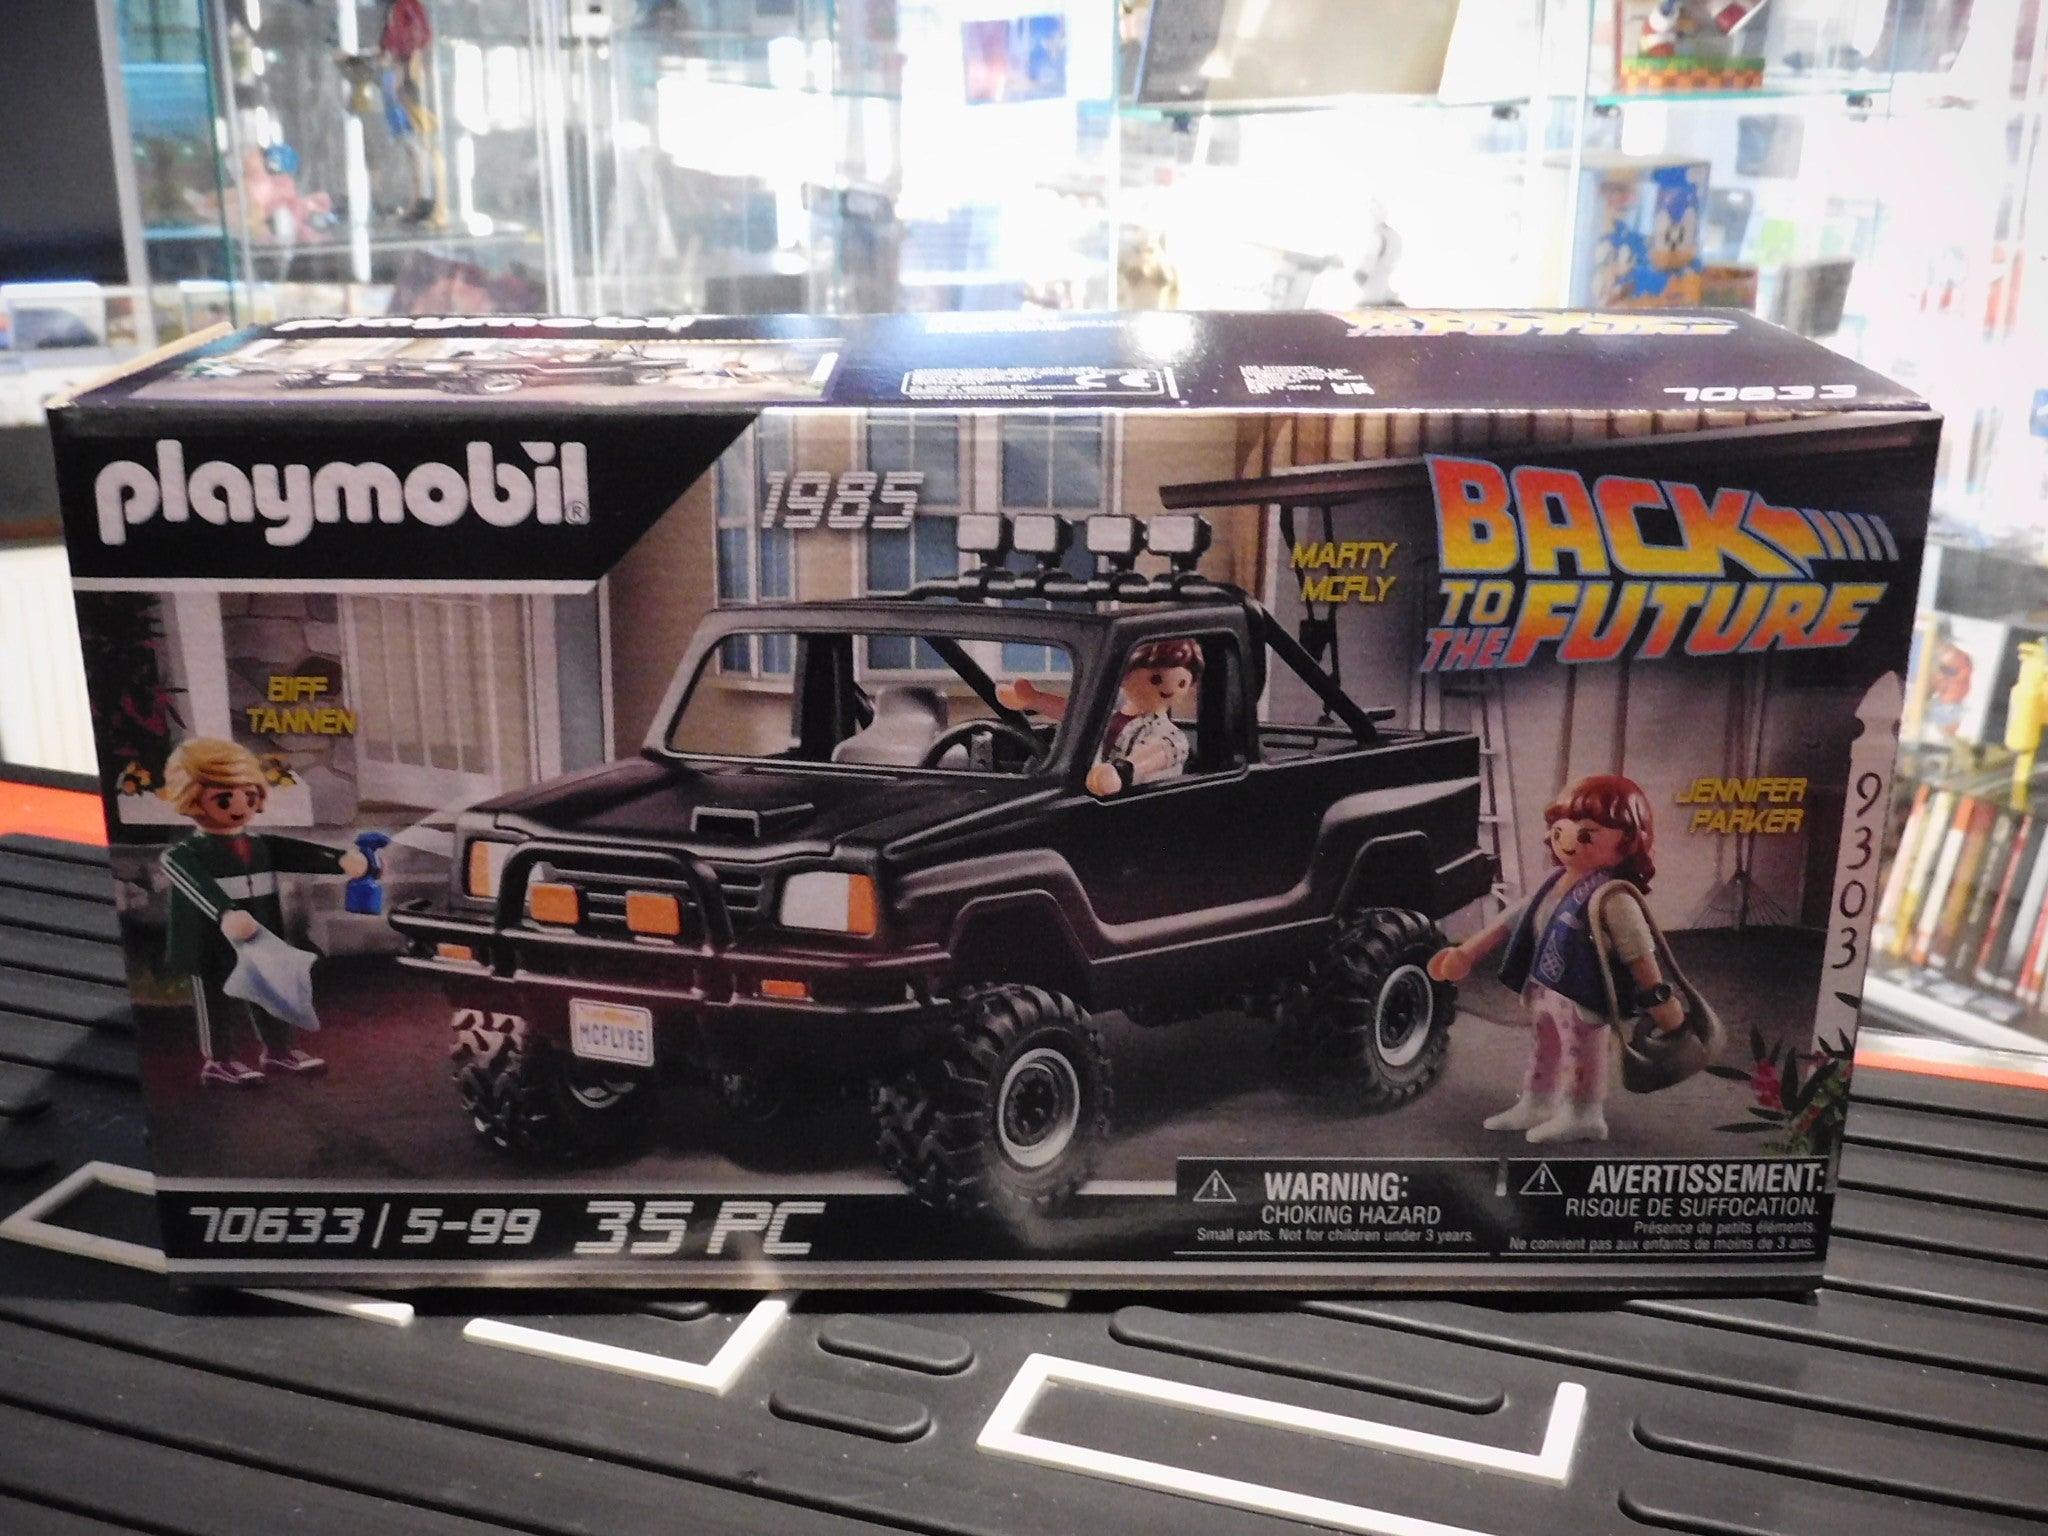 BACK TO THE FUTURE - PICK-UP DE MARTY 'PLAYMOBIL'